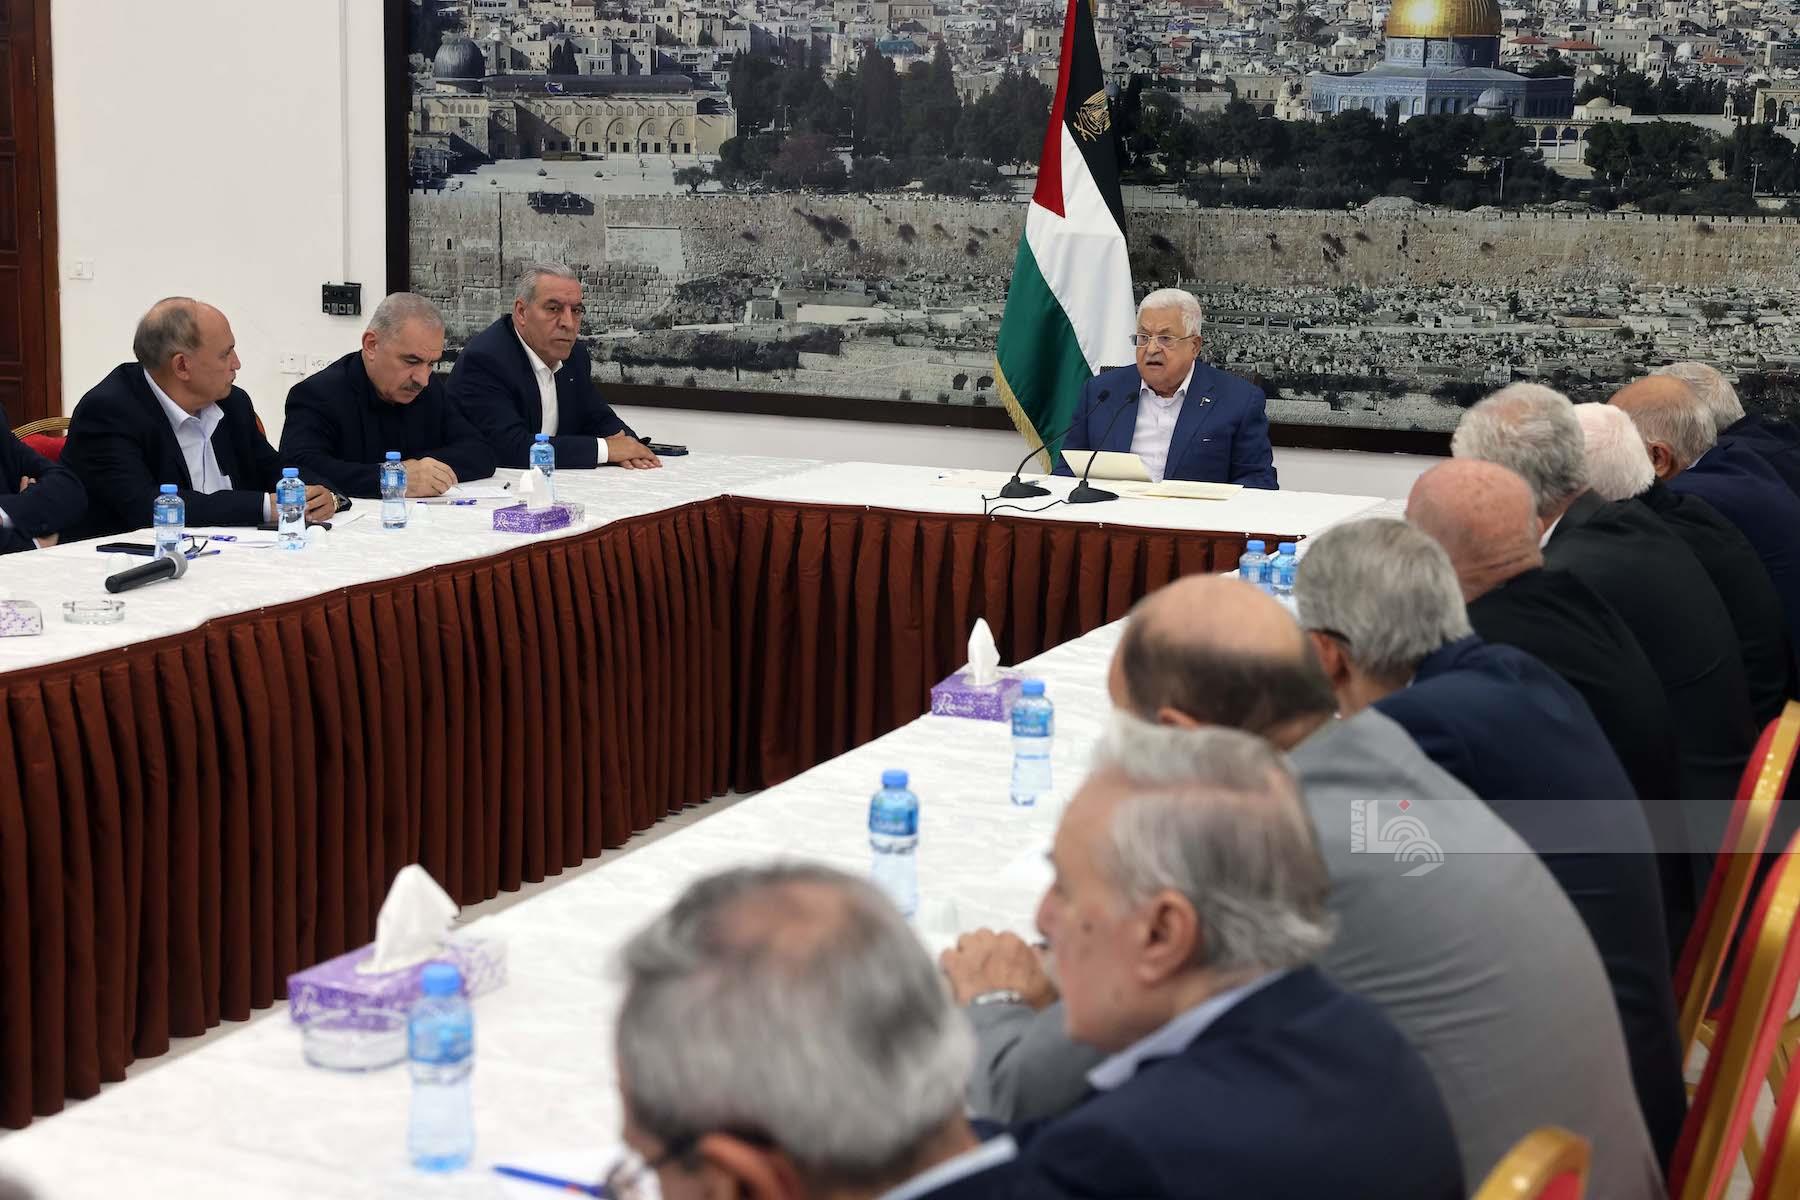 President Abbas says the Baptist Hospital massacre will not be tolerated and will not pass without accountability